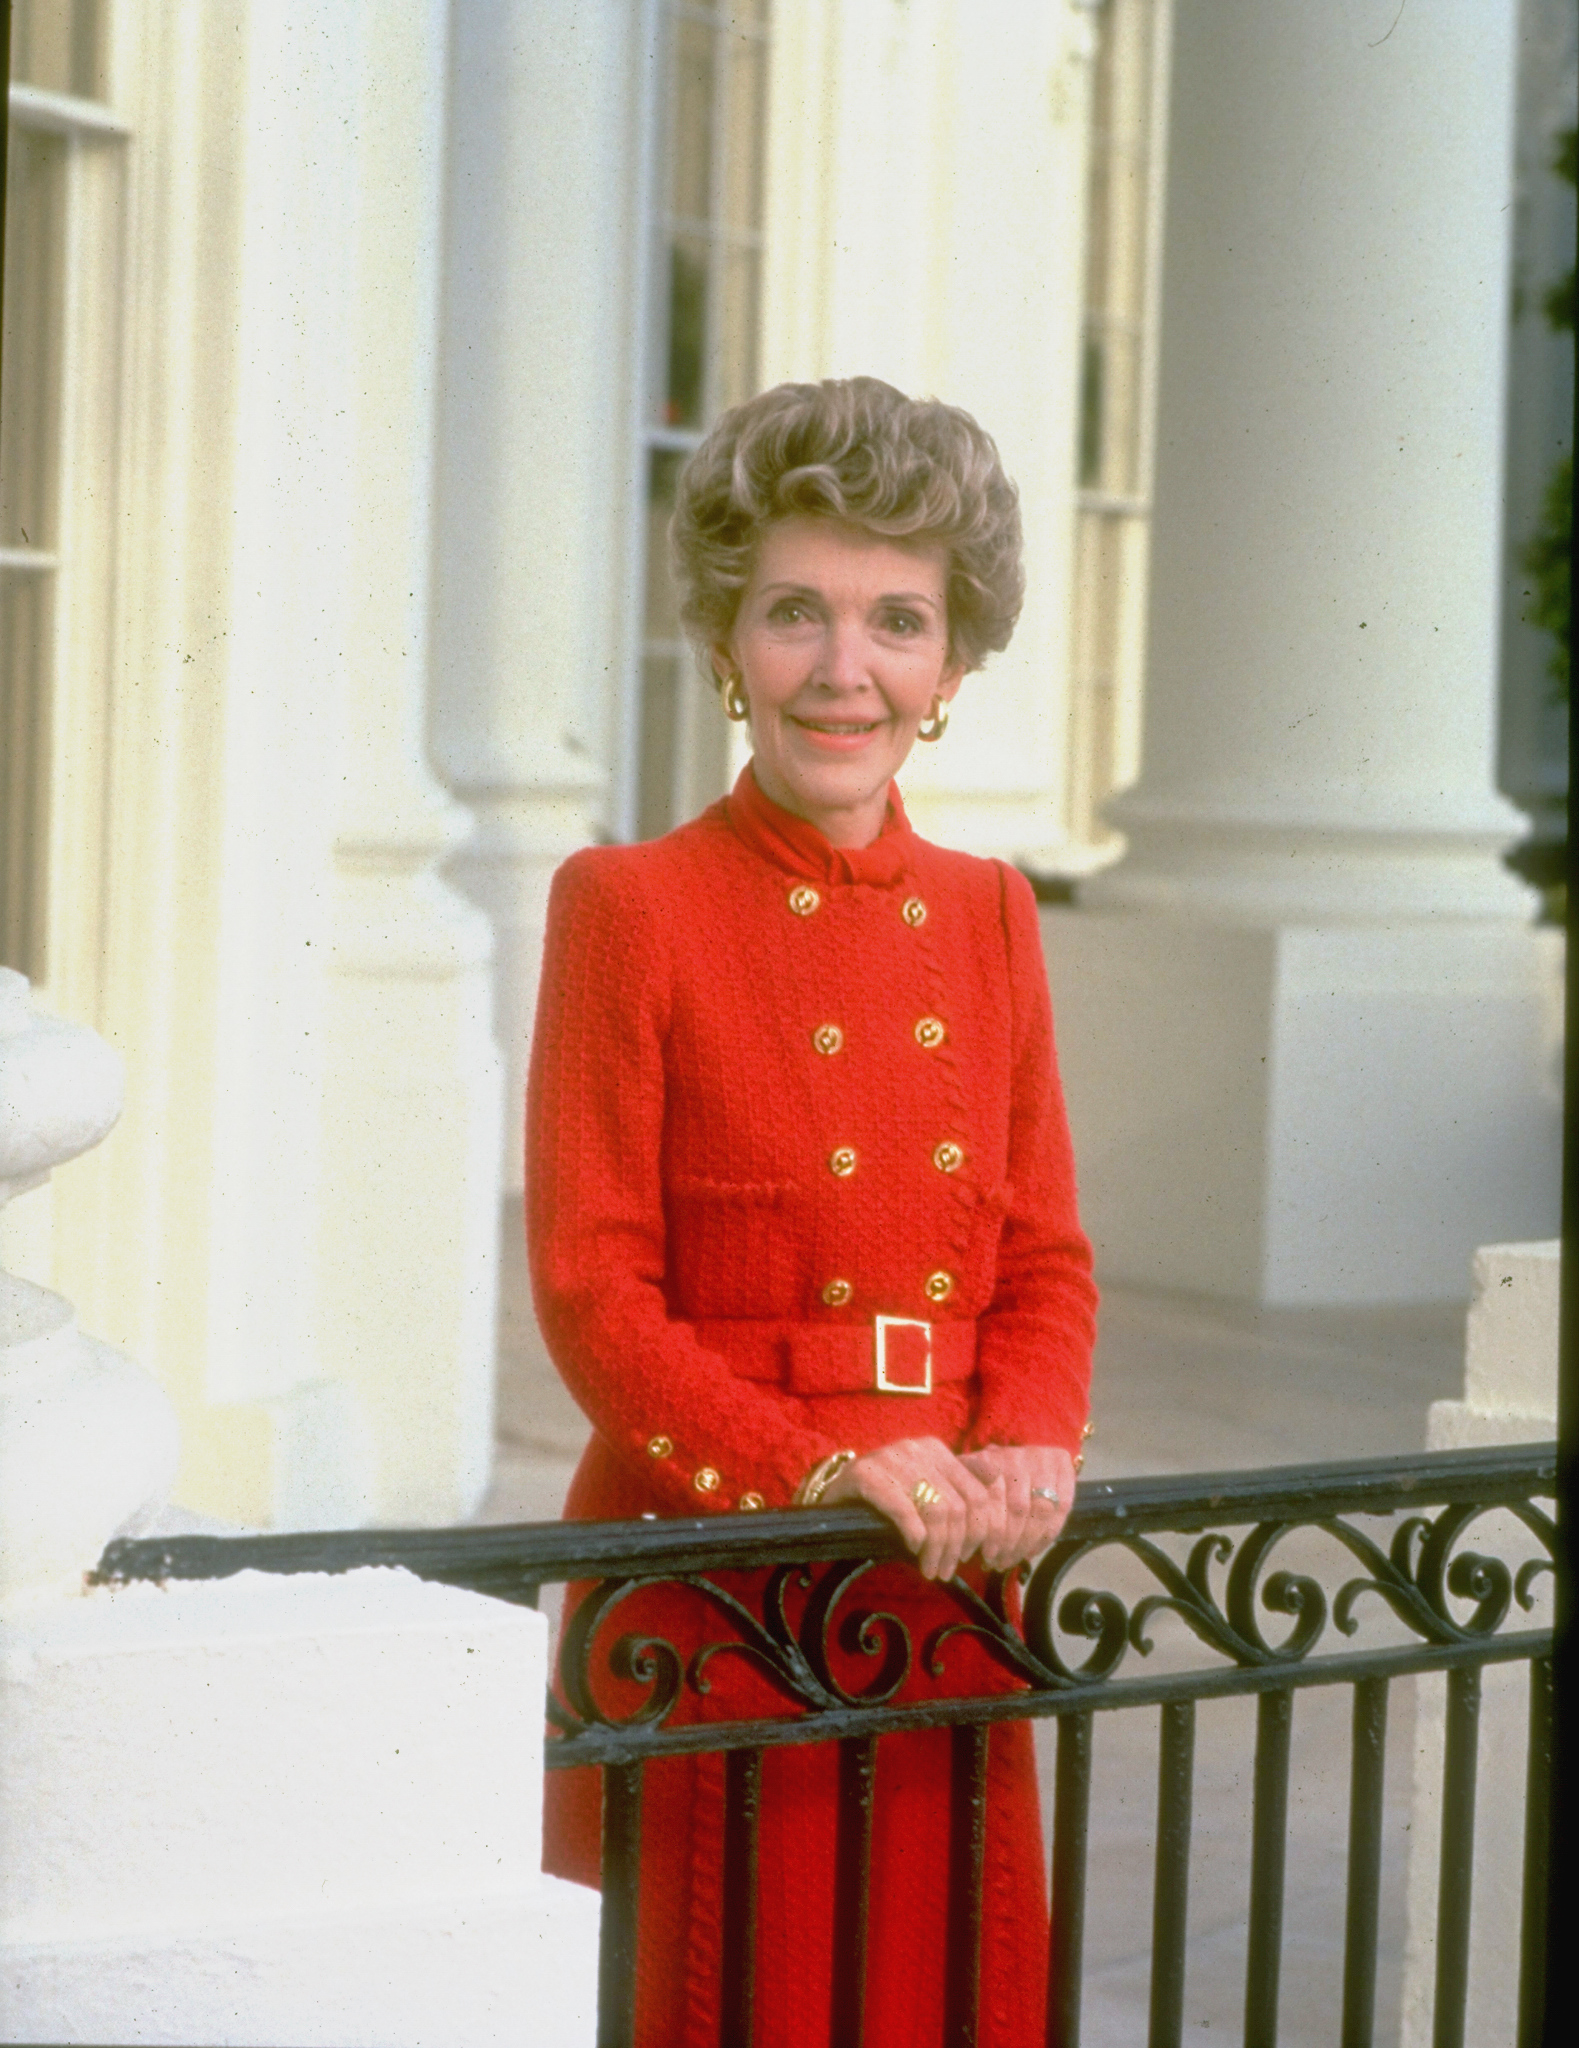 Portrait of a First Lady When she arrived in Washington in 1981 as the wife of U.S. President Ronald Reagan, Nancy Reagan restored a glamour to the White House that had been absent for several administrations. Her unwavering commitment to her husband and his policies, though controversial at times, inspired Americans on both sides of the political spectrum.